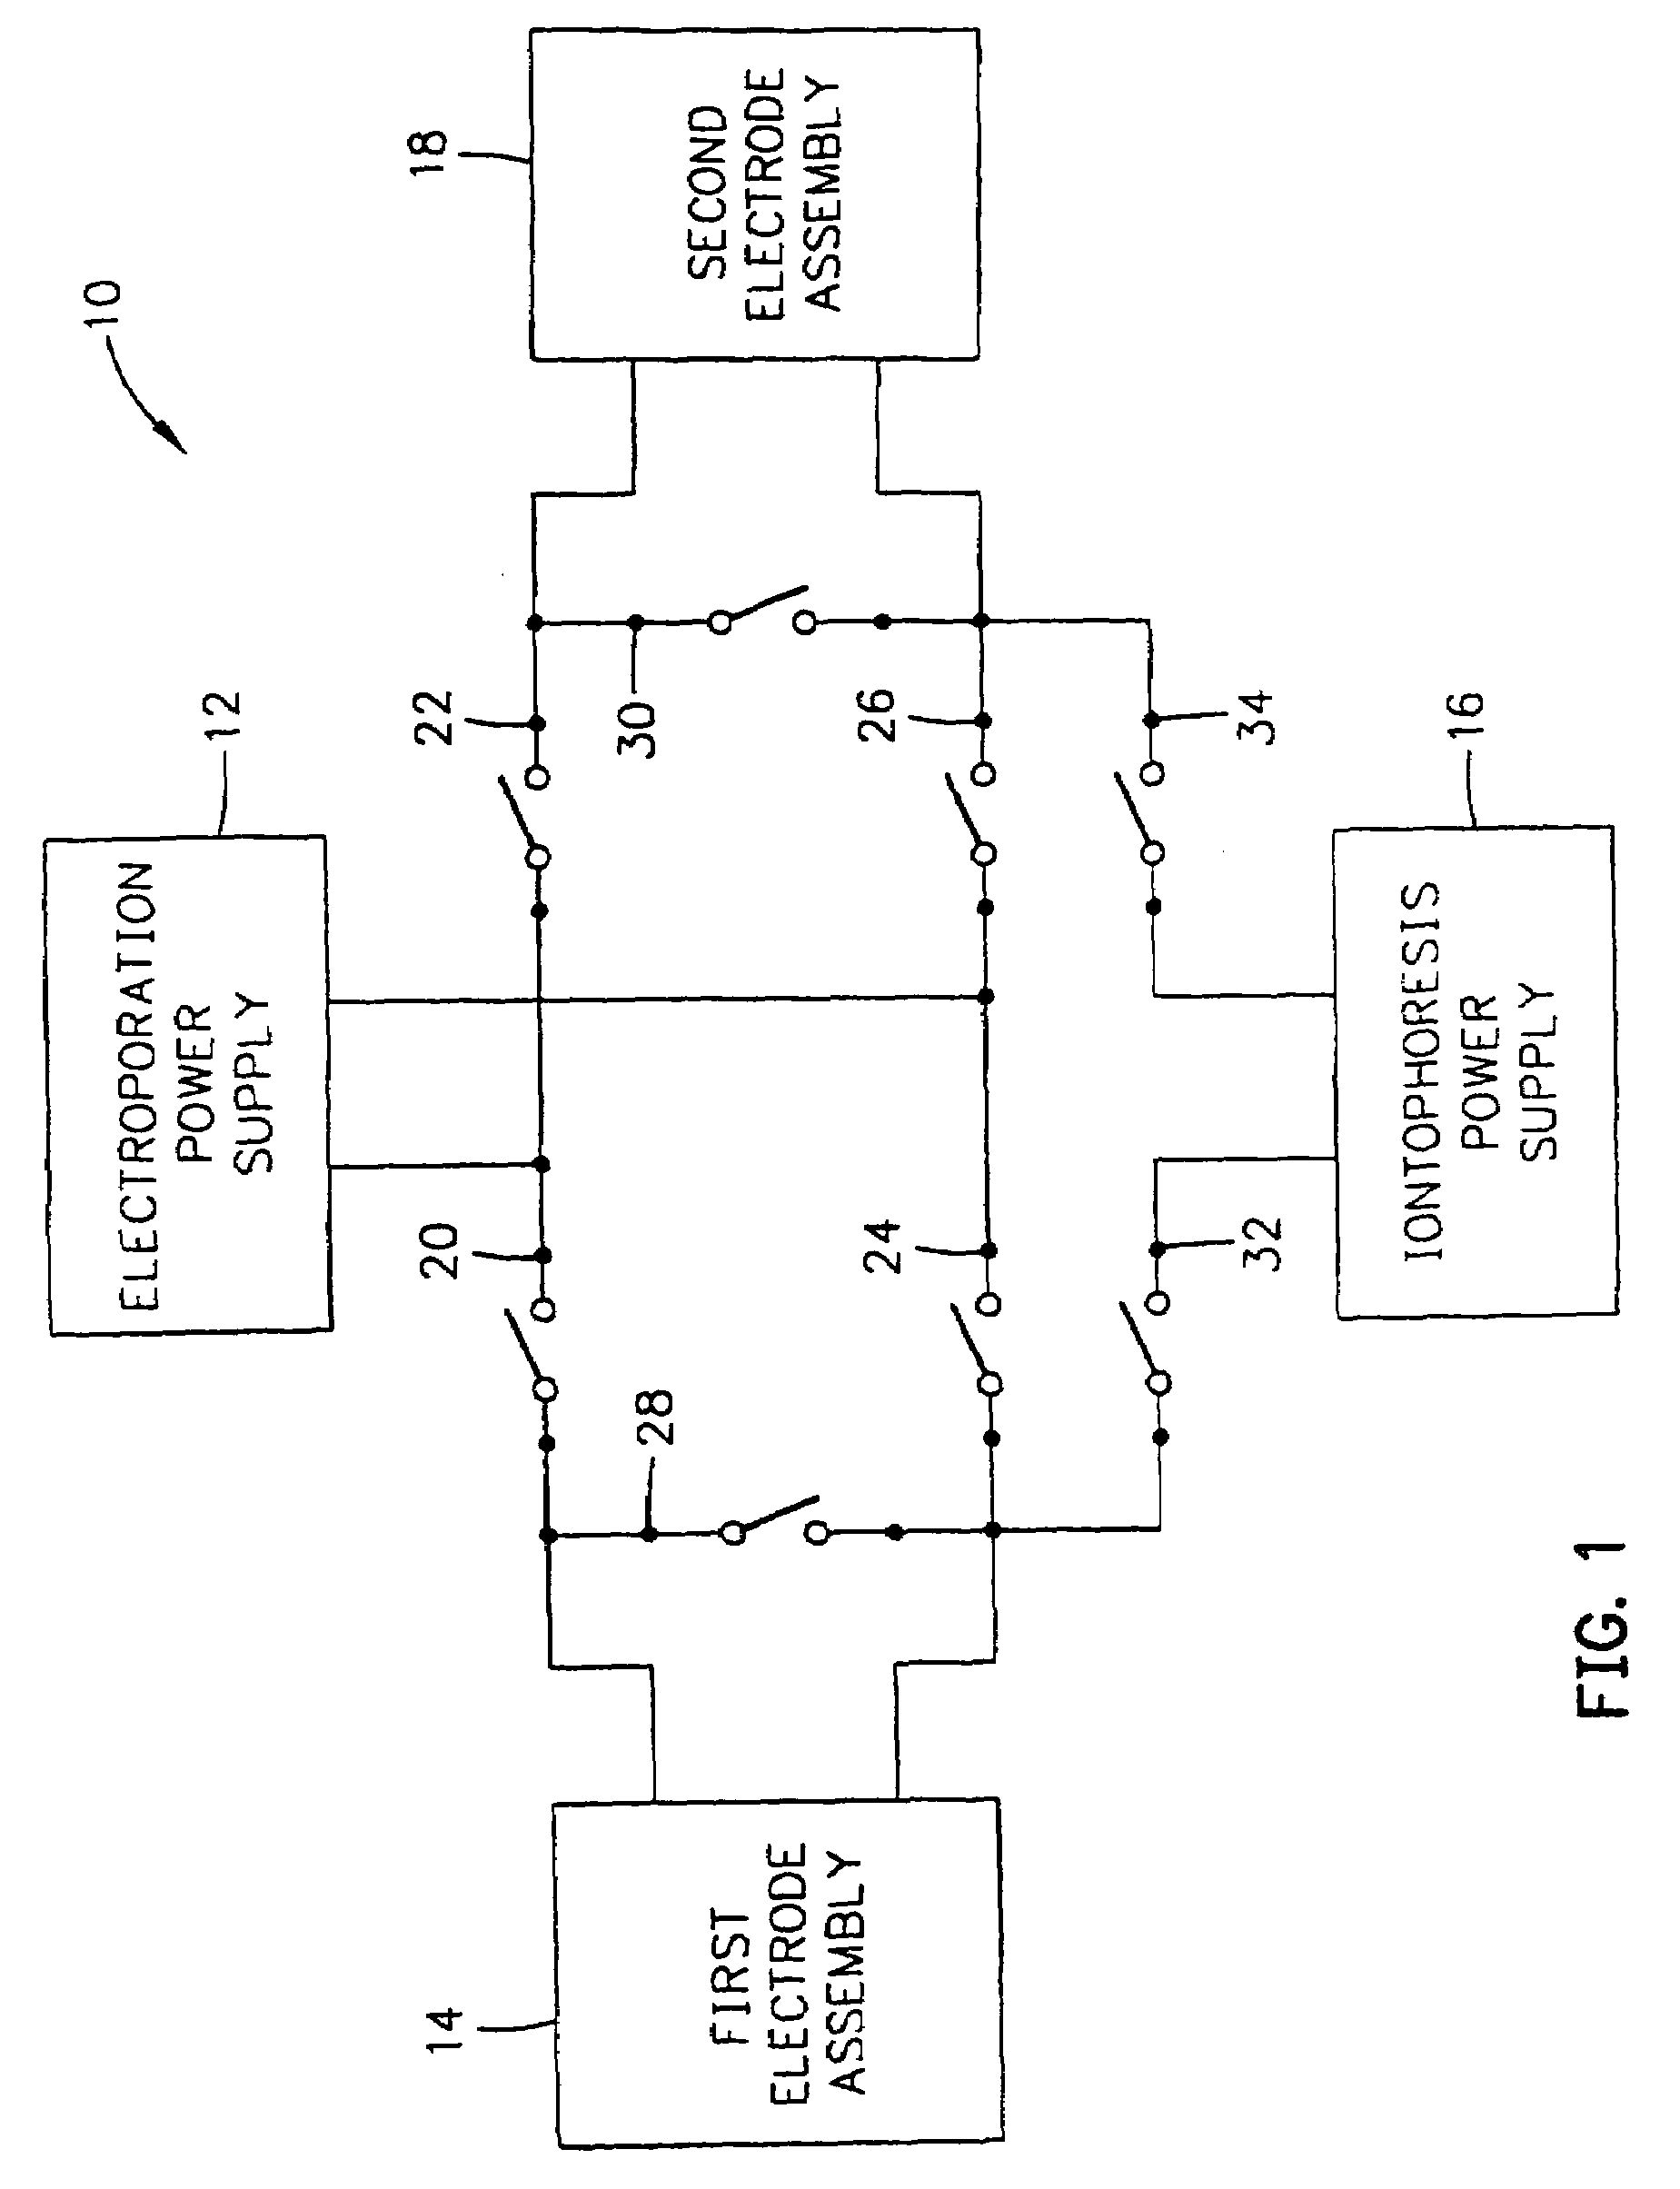 Electrode apparatus and method for the delivery of drugs and genes into tissue